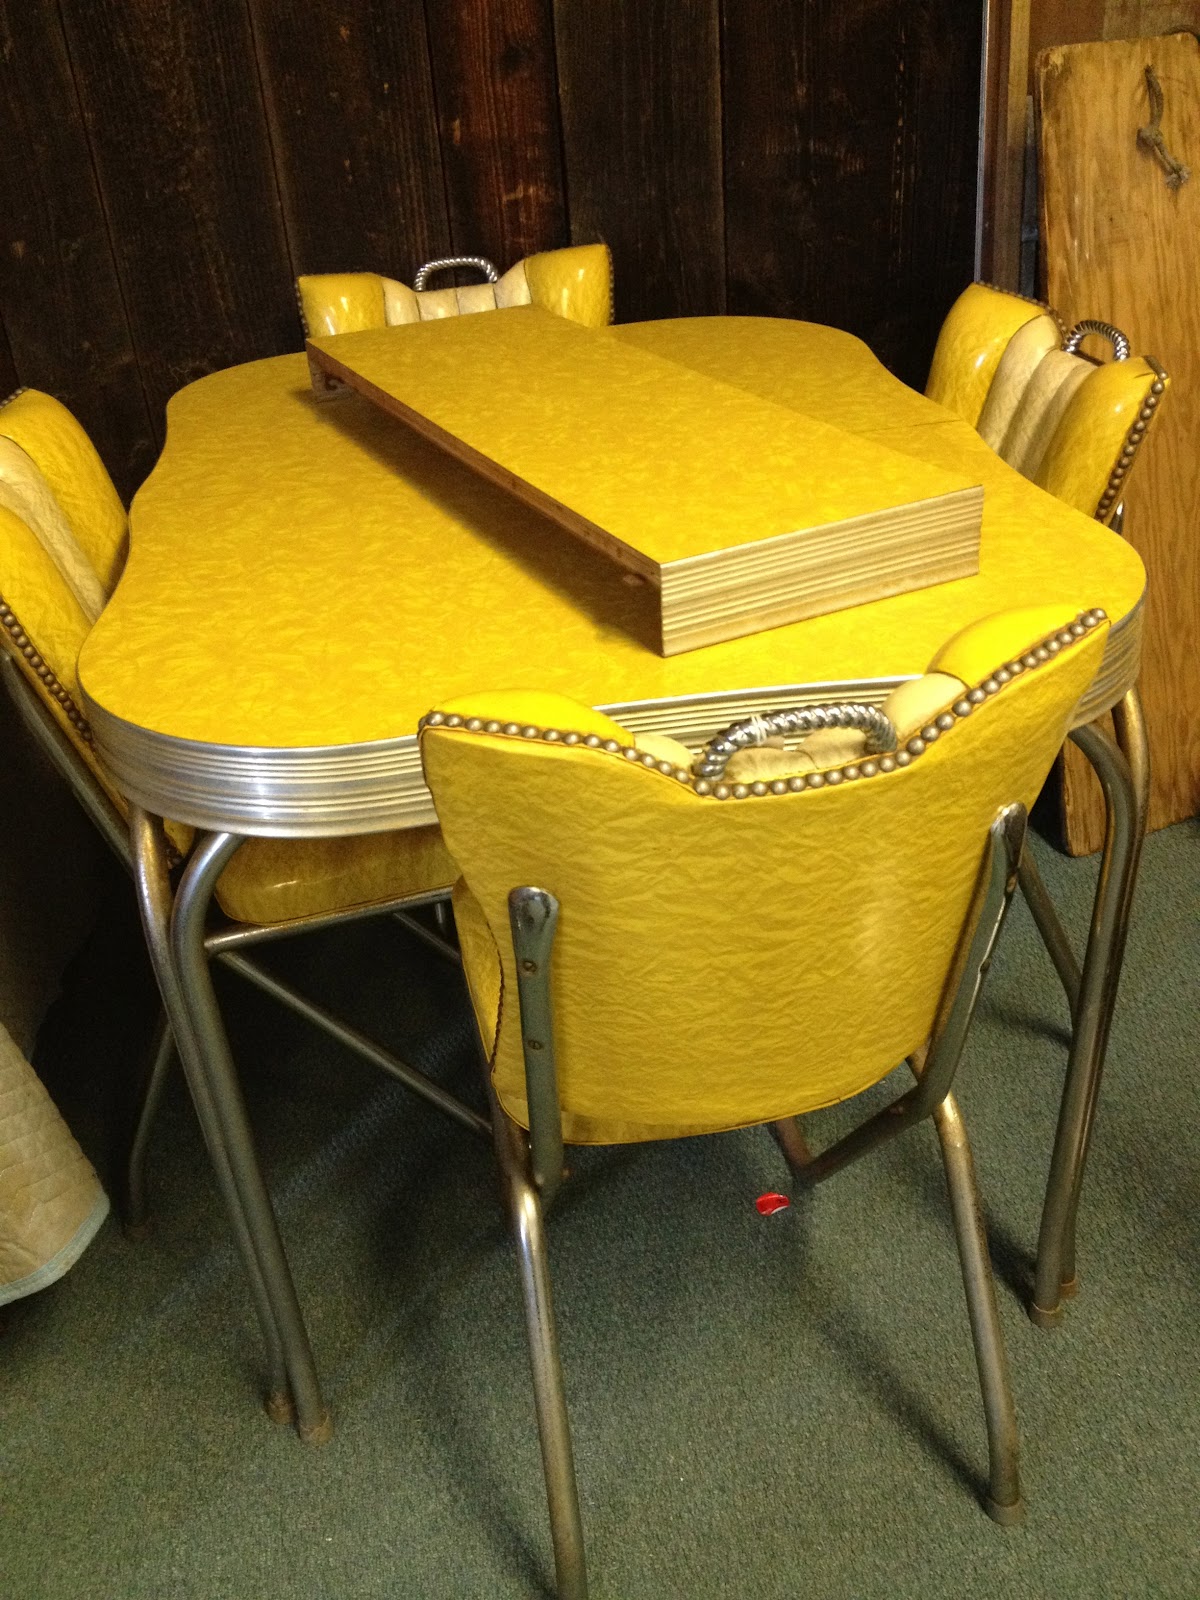 John S Retro Kitchen Table And Chairs